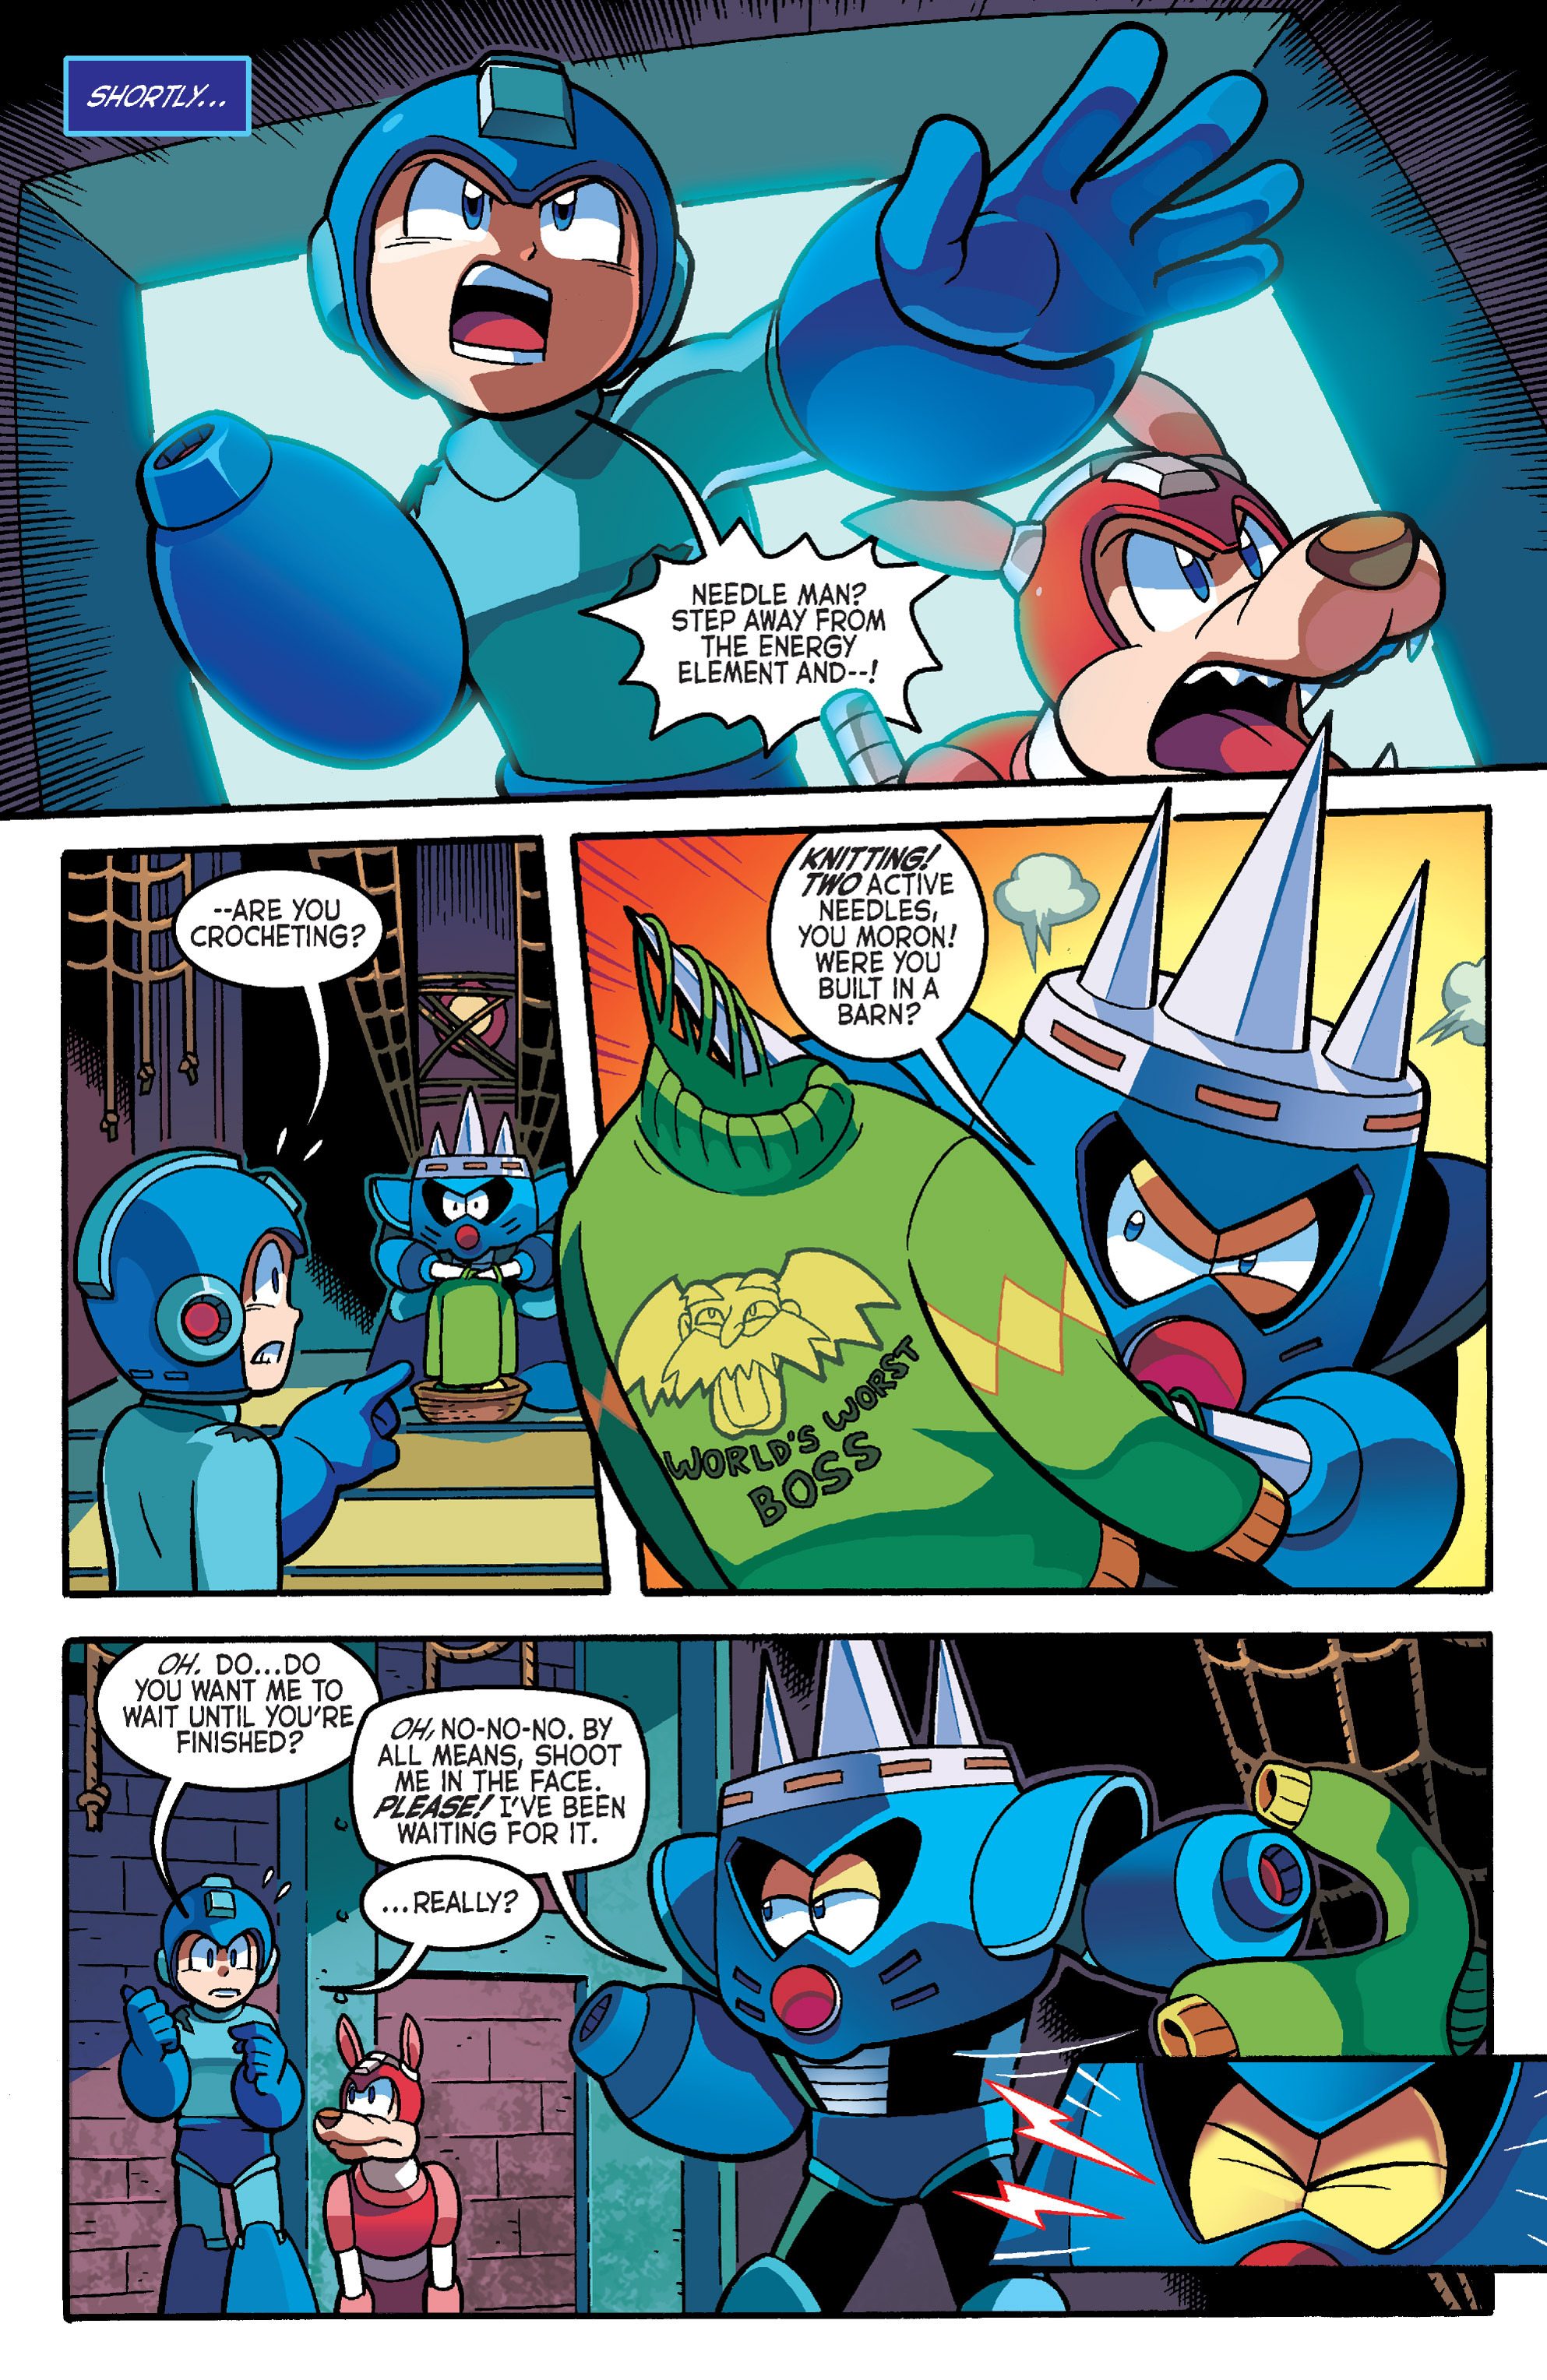 Mega Man Issue 43 Read Mega Man Issue 43 Comic Online In High Quality Read Full Comic Online 